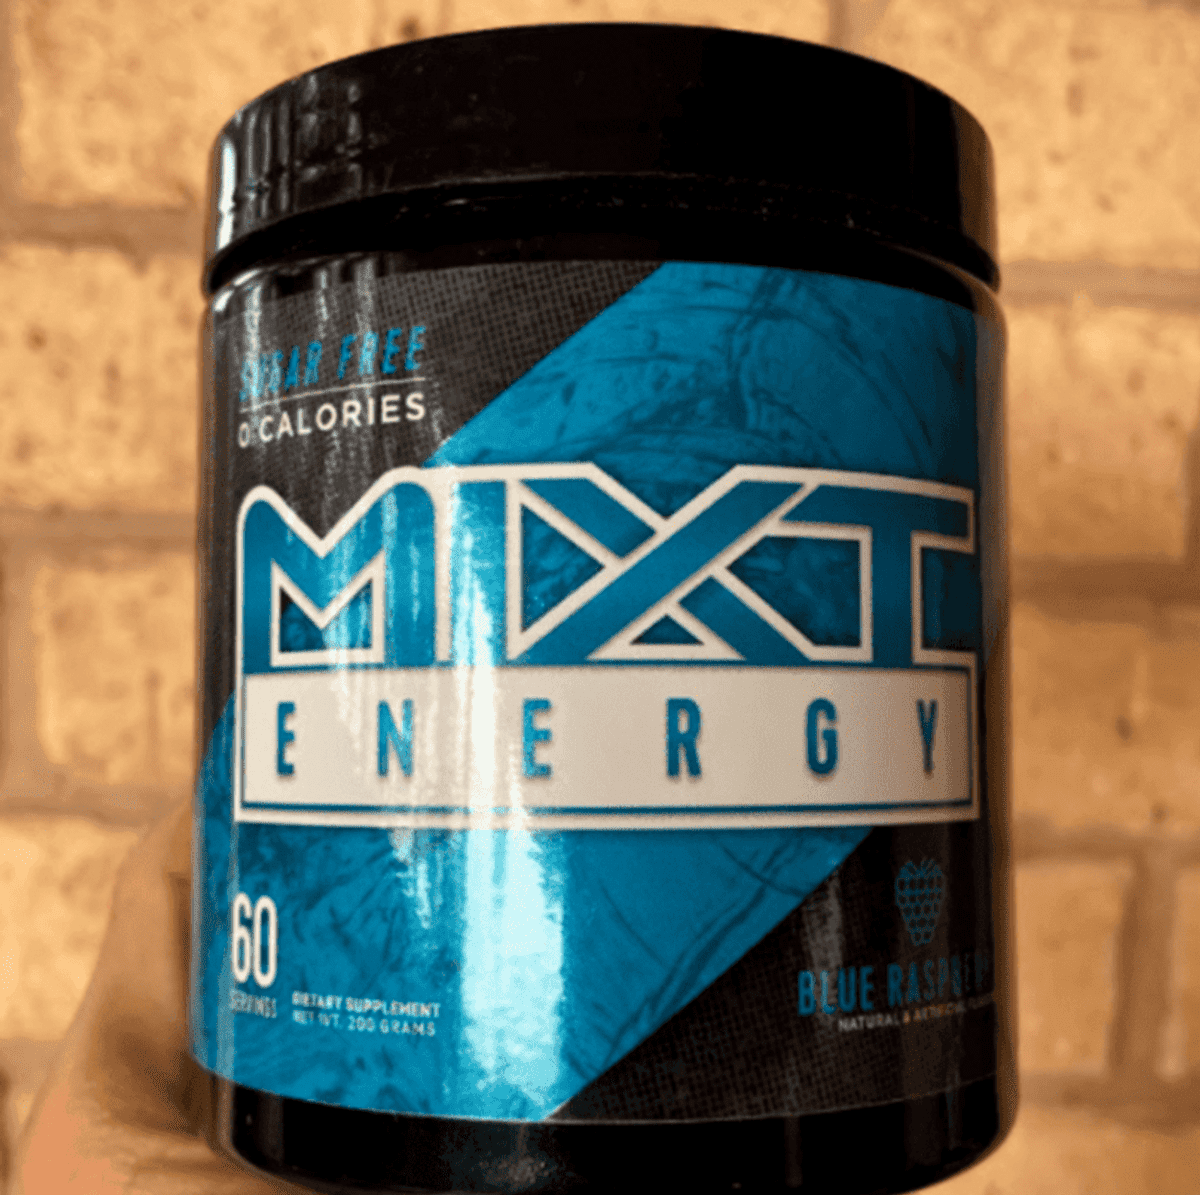  A sixty servings tub of blue raspberry flavored mixt energy.